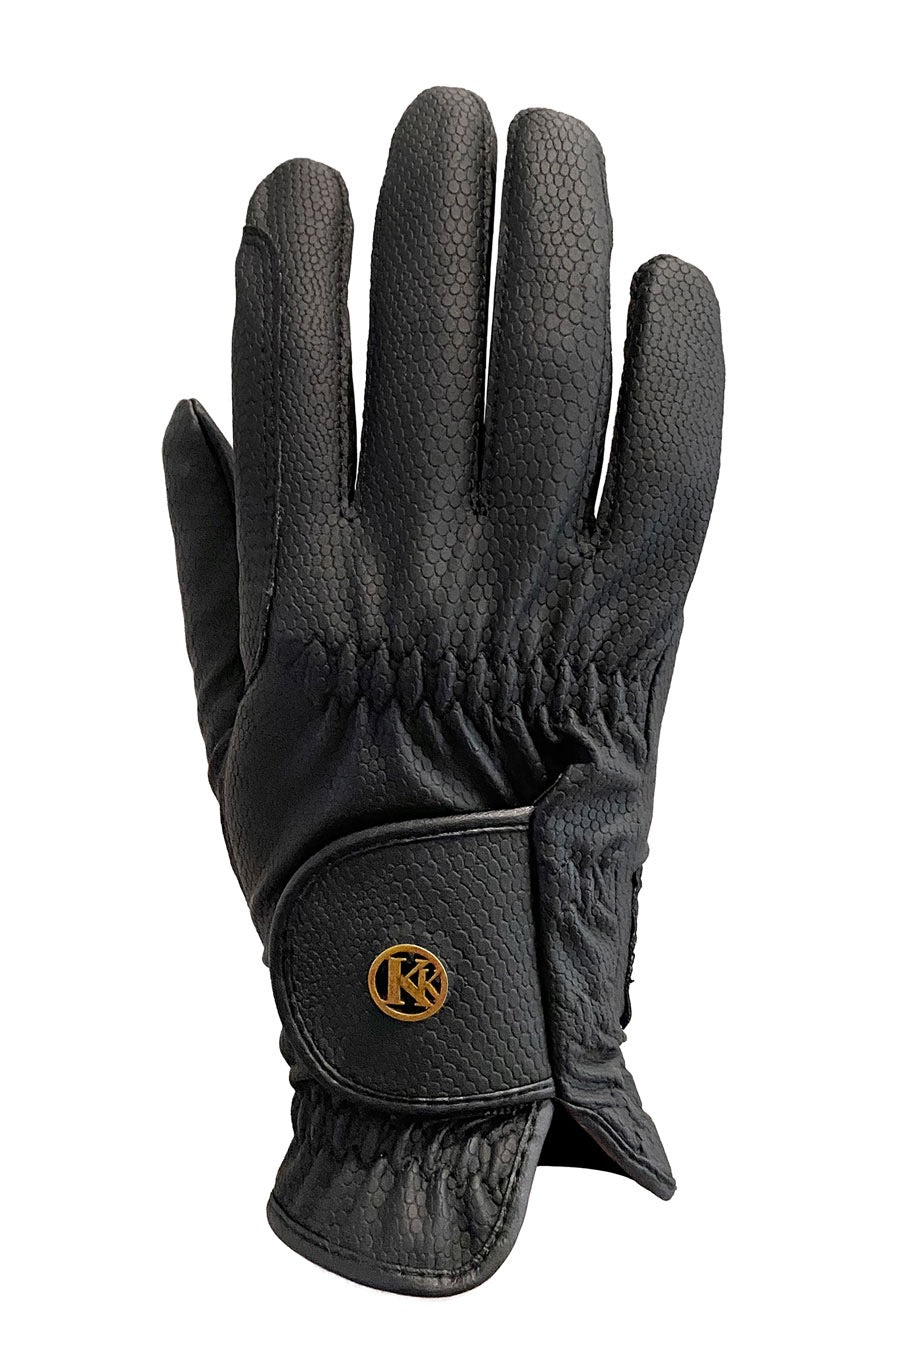 Black synthetic leather fitted glove.  Velcro enclosure at wrist with a K logo